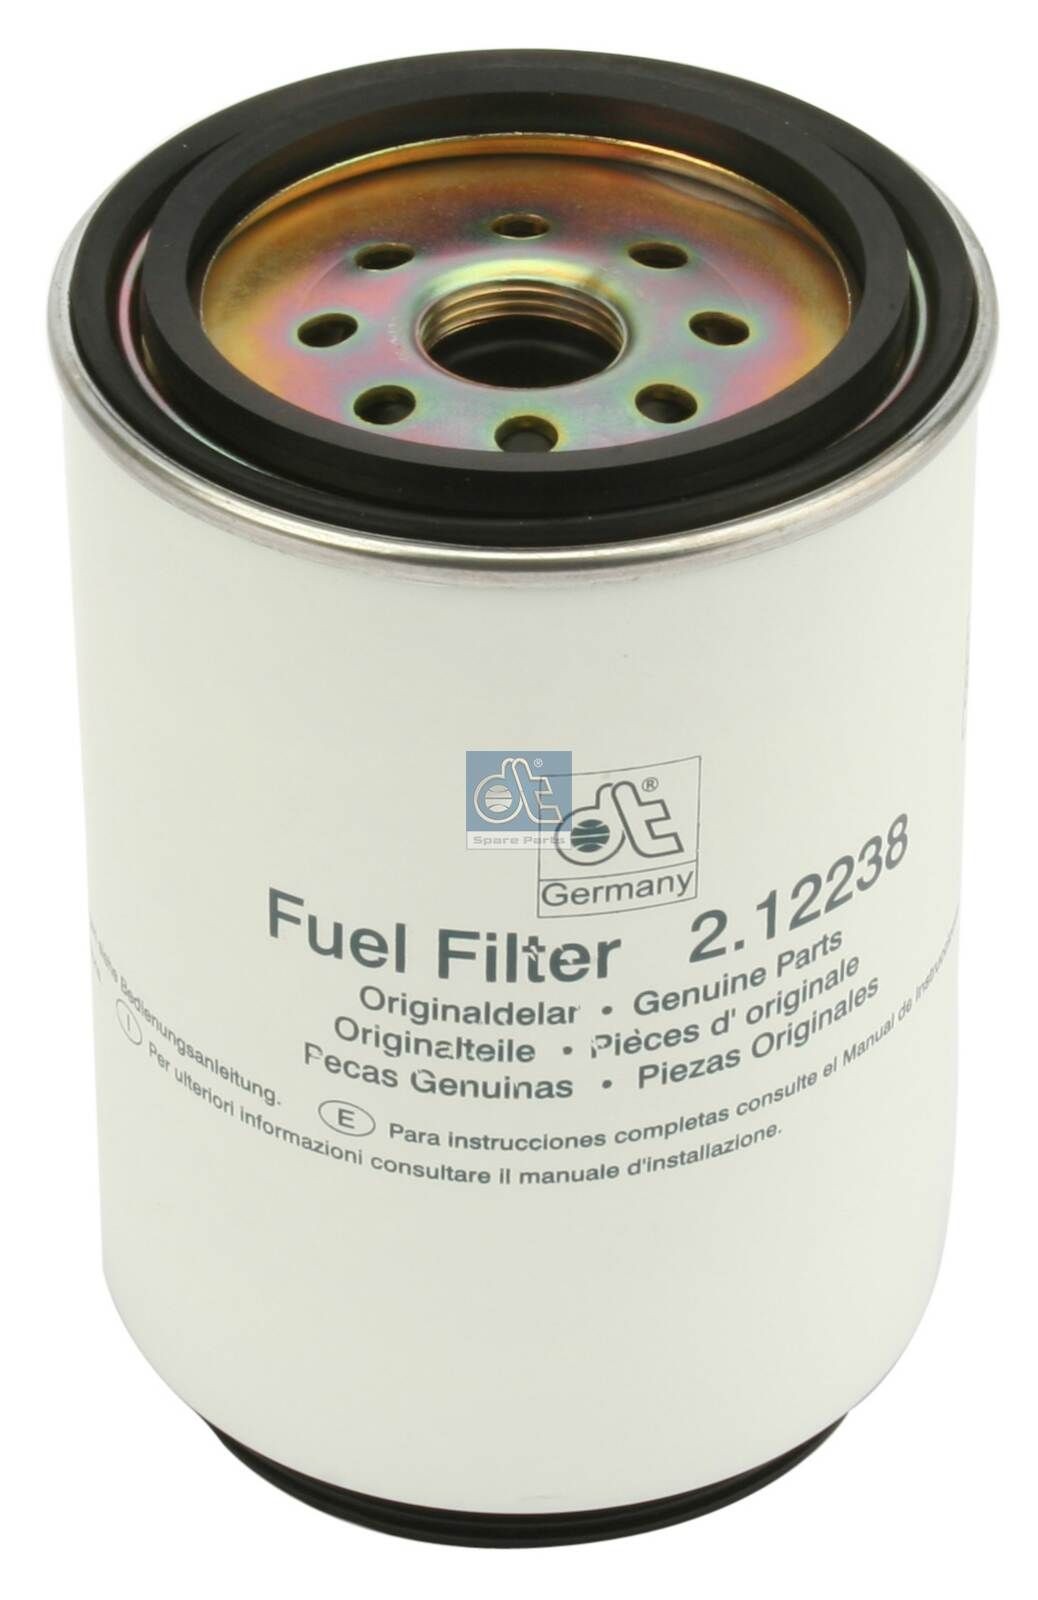 Great value for money - DT Spare Parts Fuel filter 2.12238